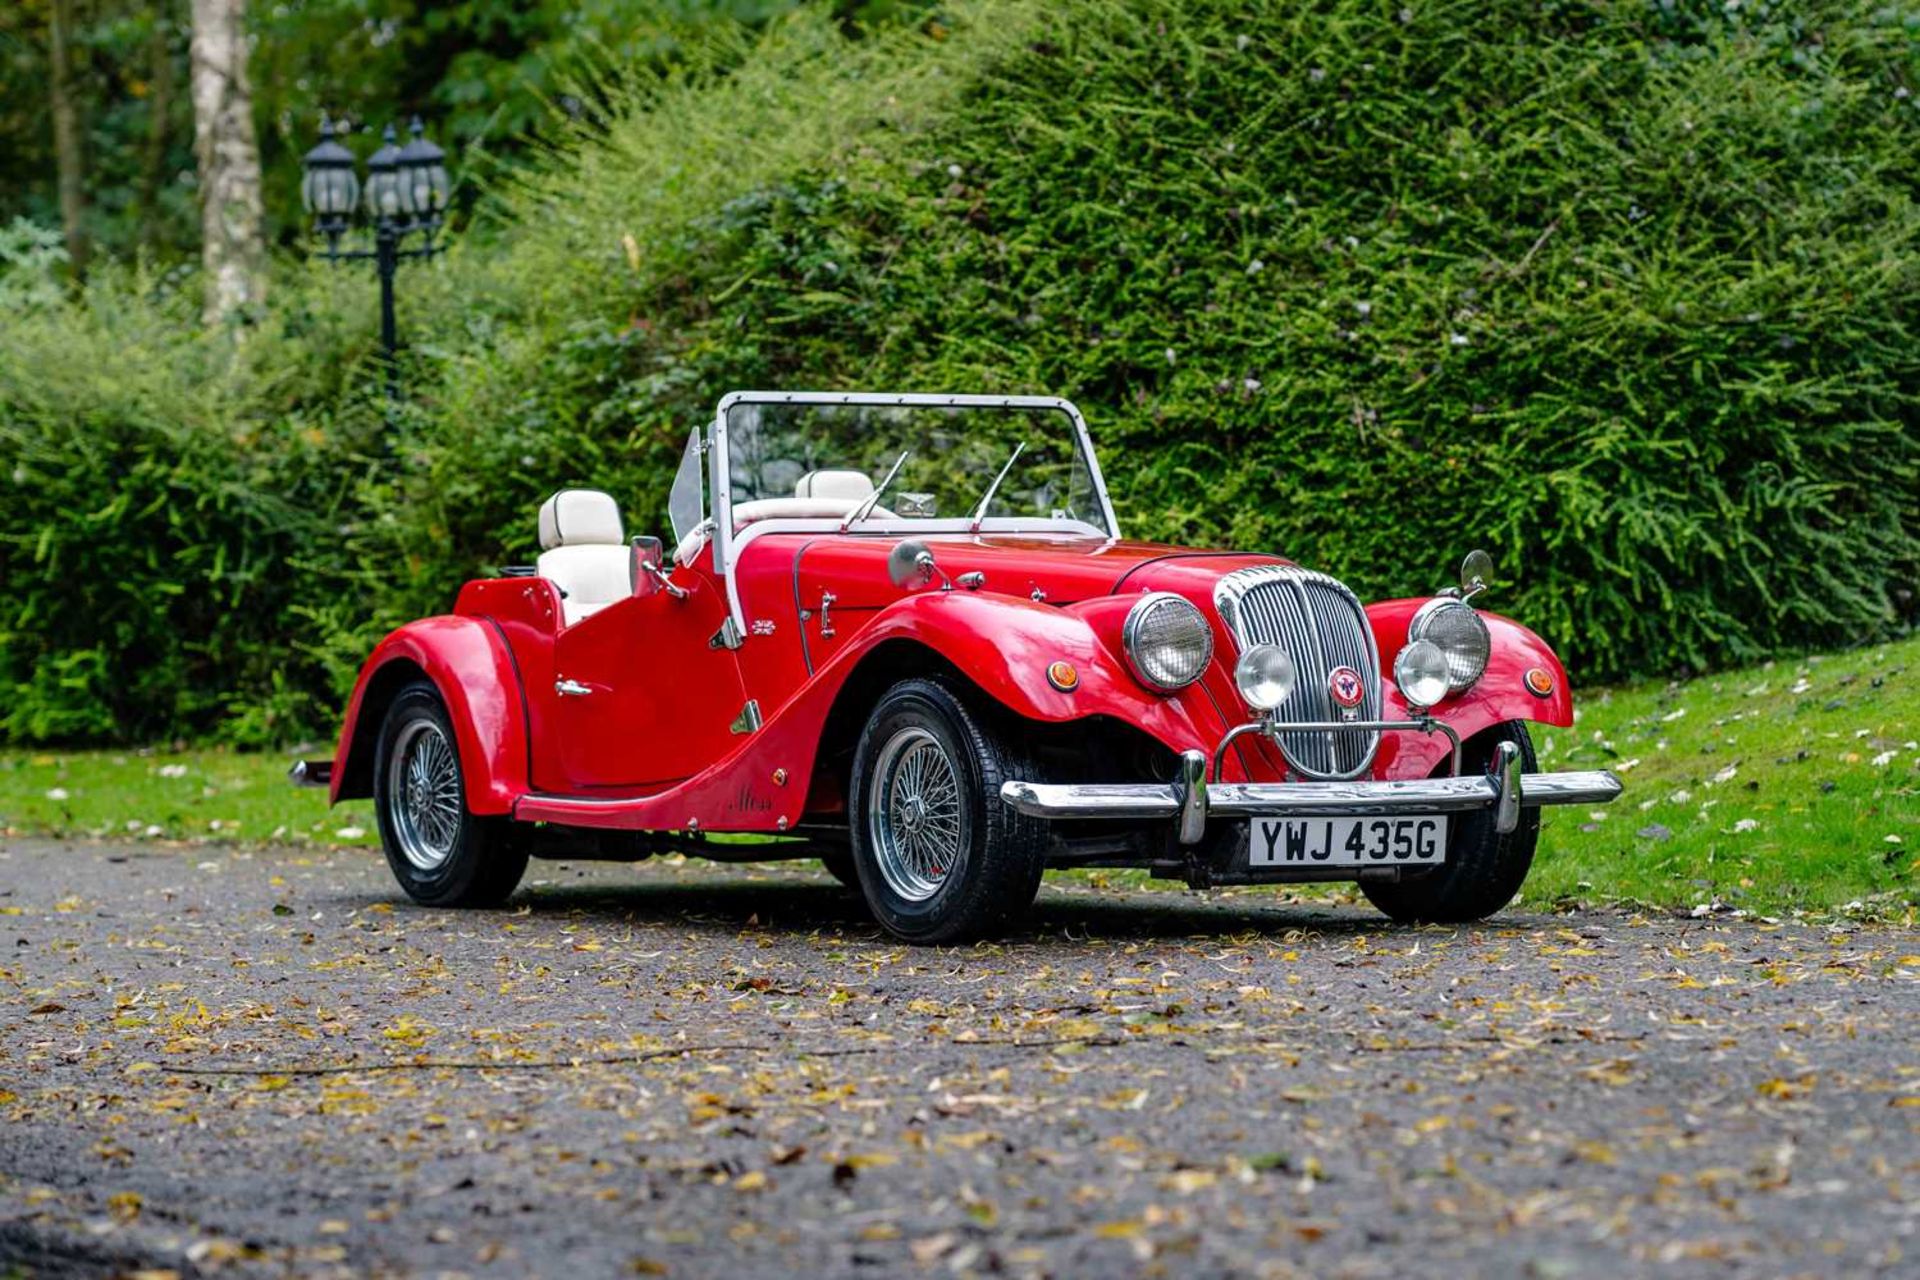 1990 Moss Sport Roadster ***NO RESERVE*** 123 of c.150 Moss Roadsters built, powered by a 2-litre MK